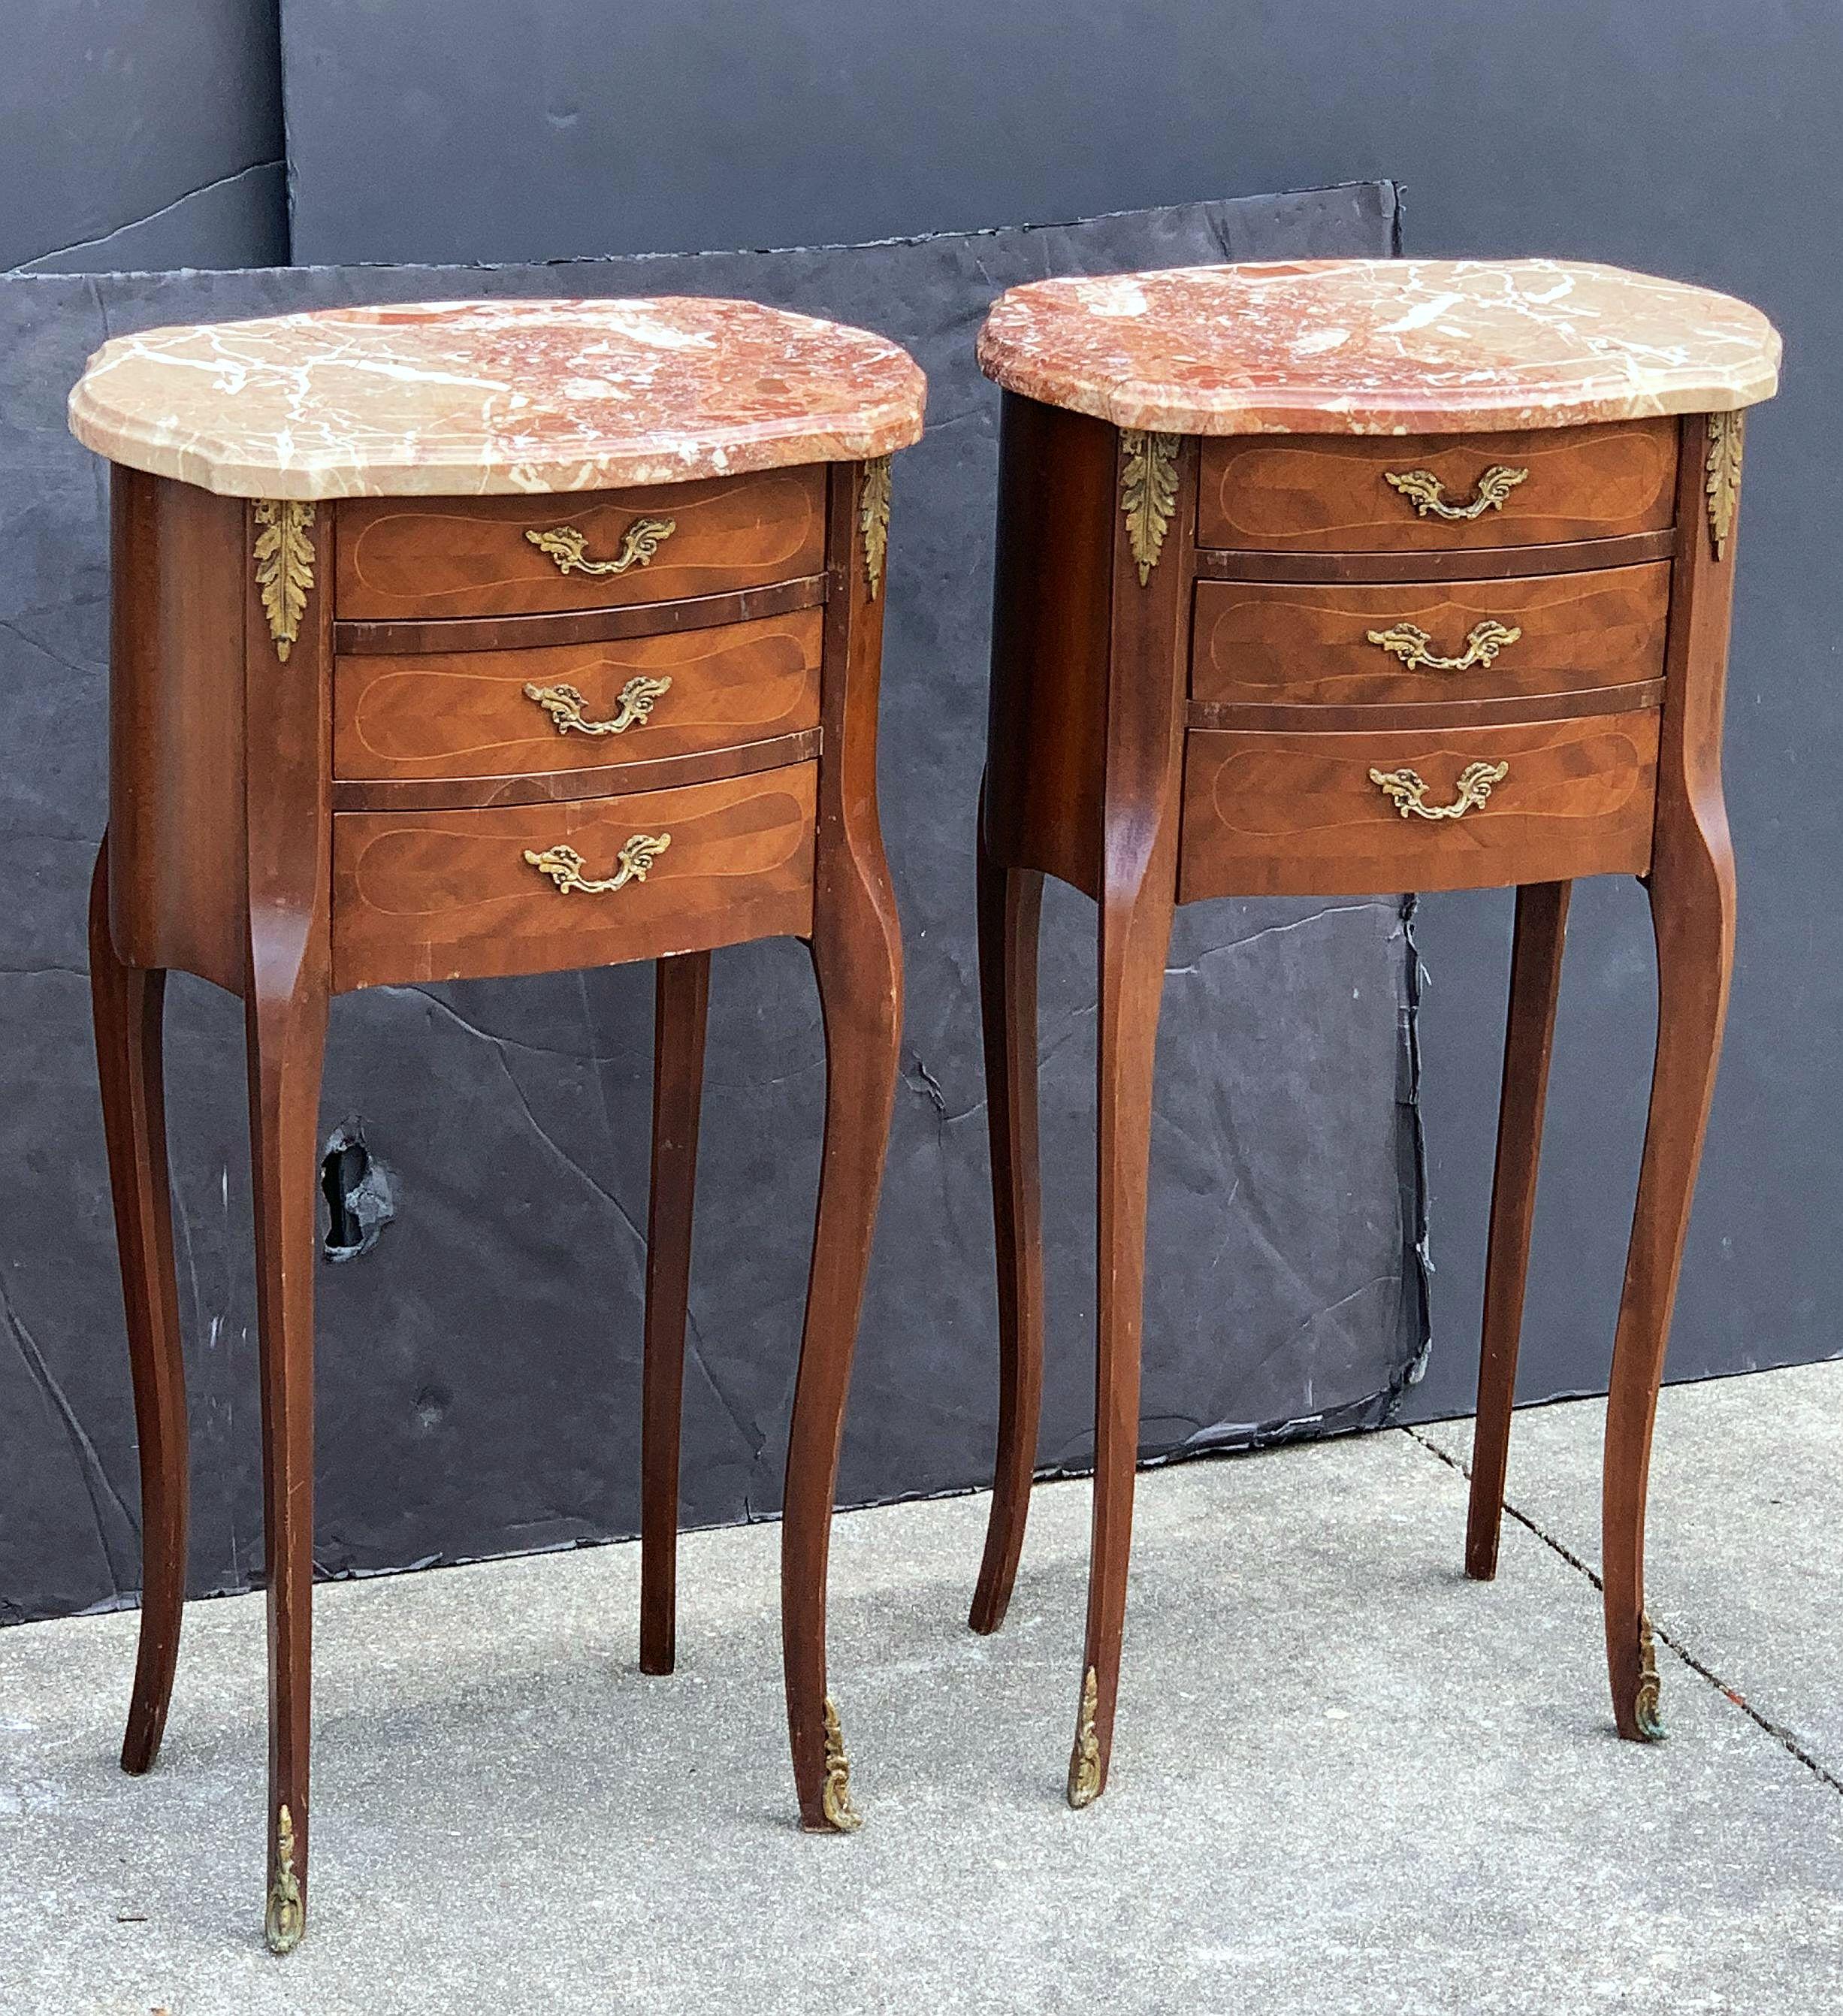 20th Century French Inlaid Nightstands or Bedside Tables, 'Individually Priced' For Sale